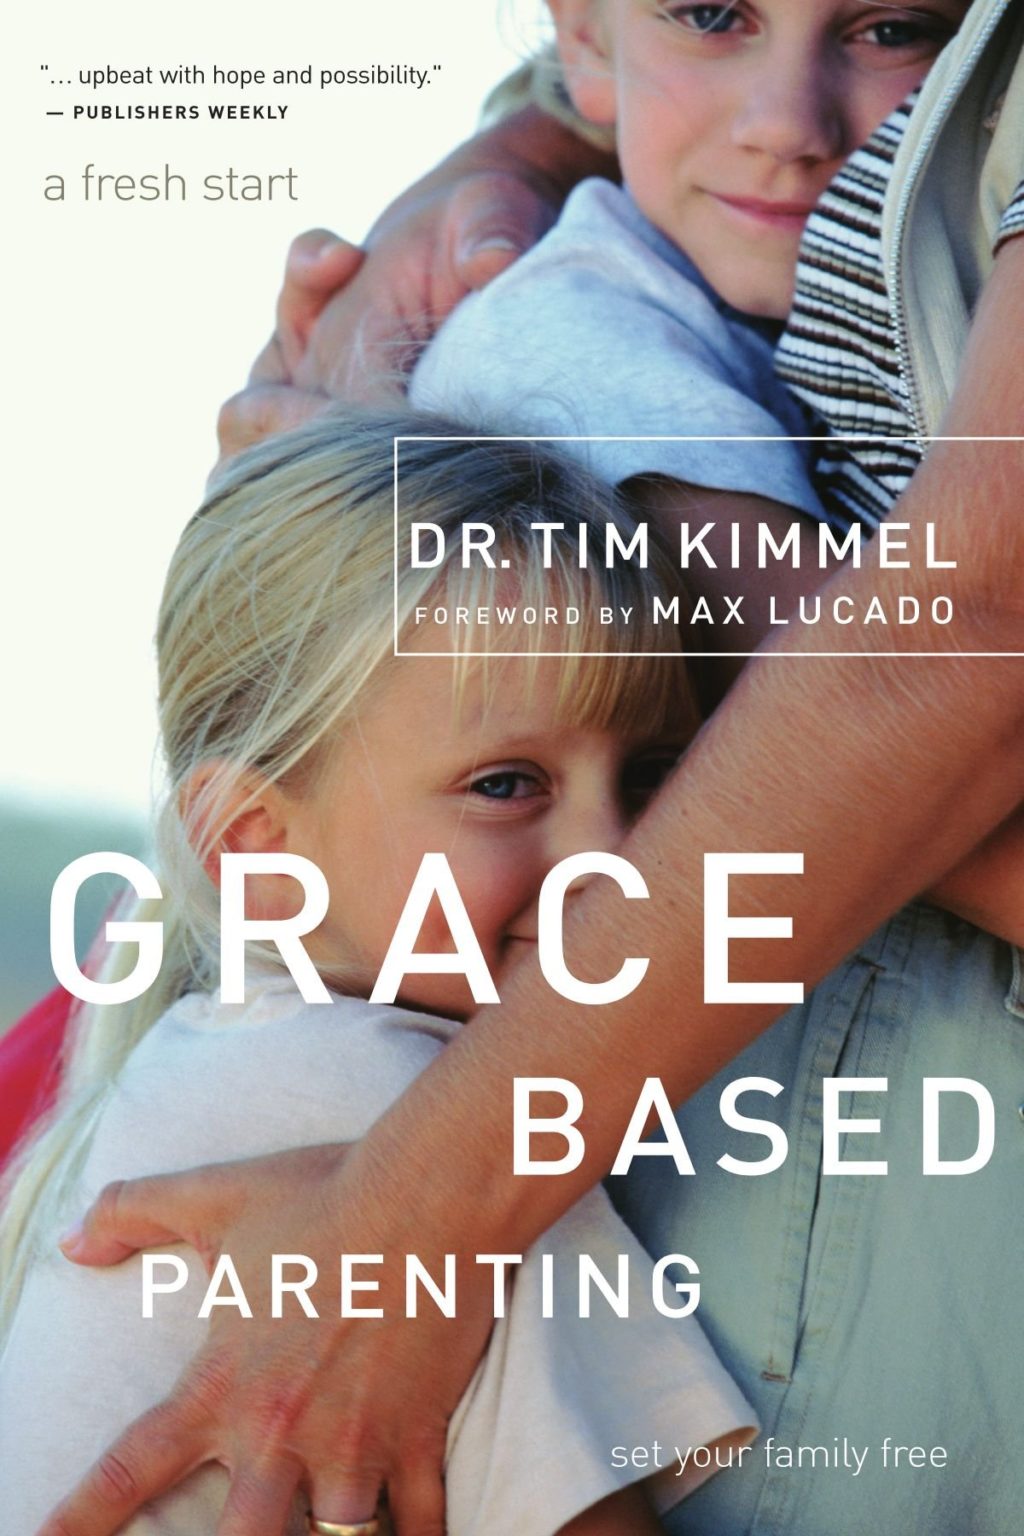 Review: Grace Based Parenting by Dr. Tim Kimmel